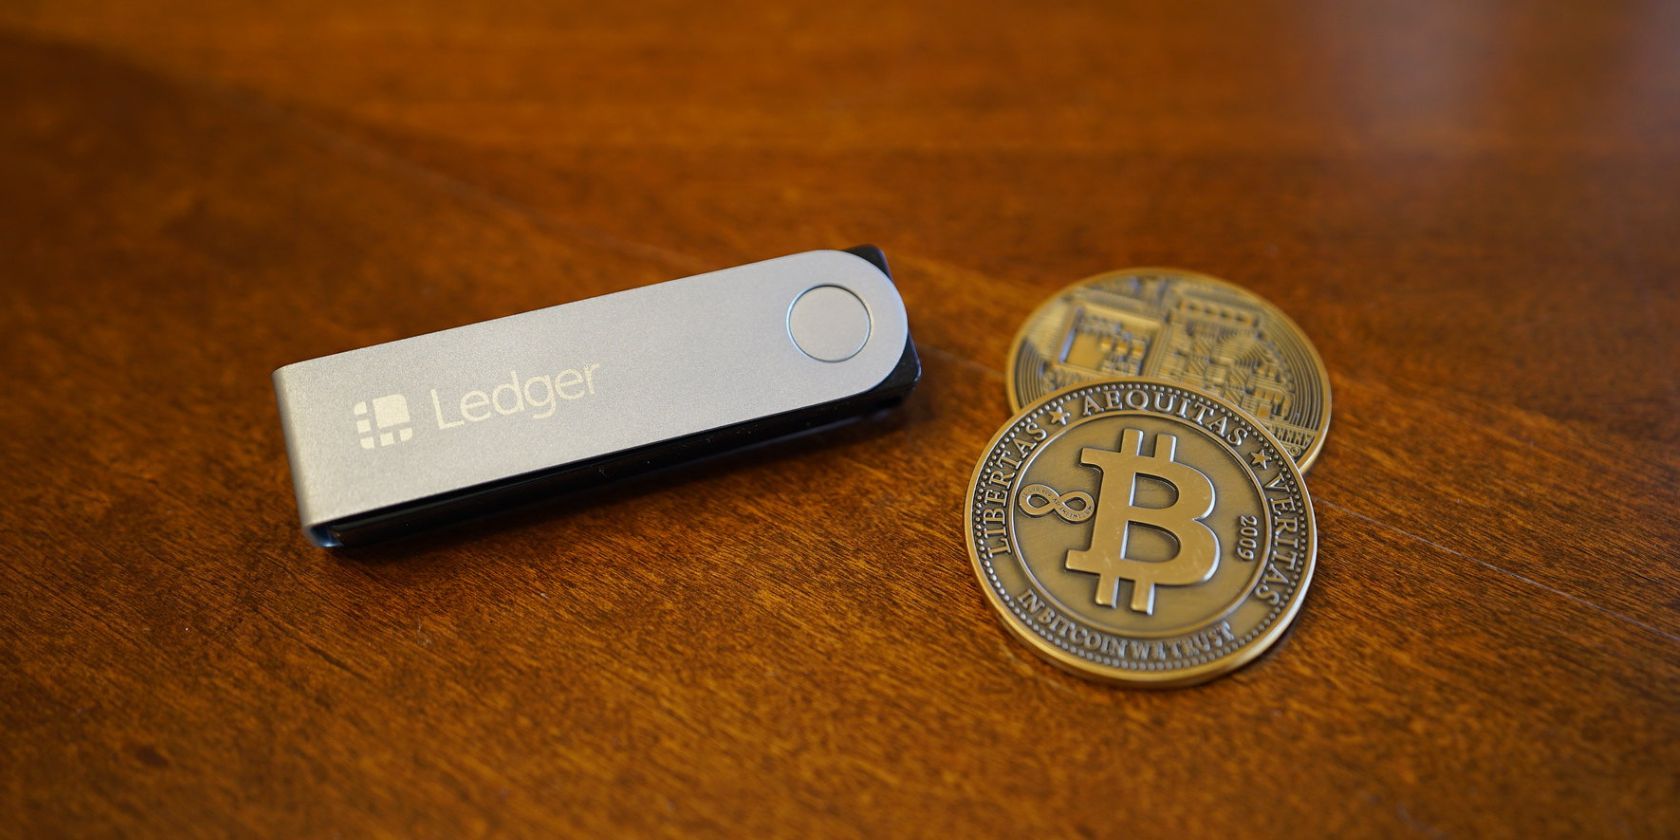 bitcoins next to ledger hardware wallet on table